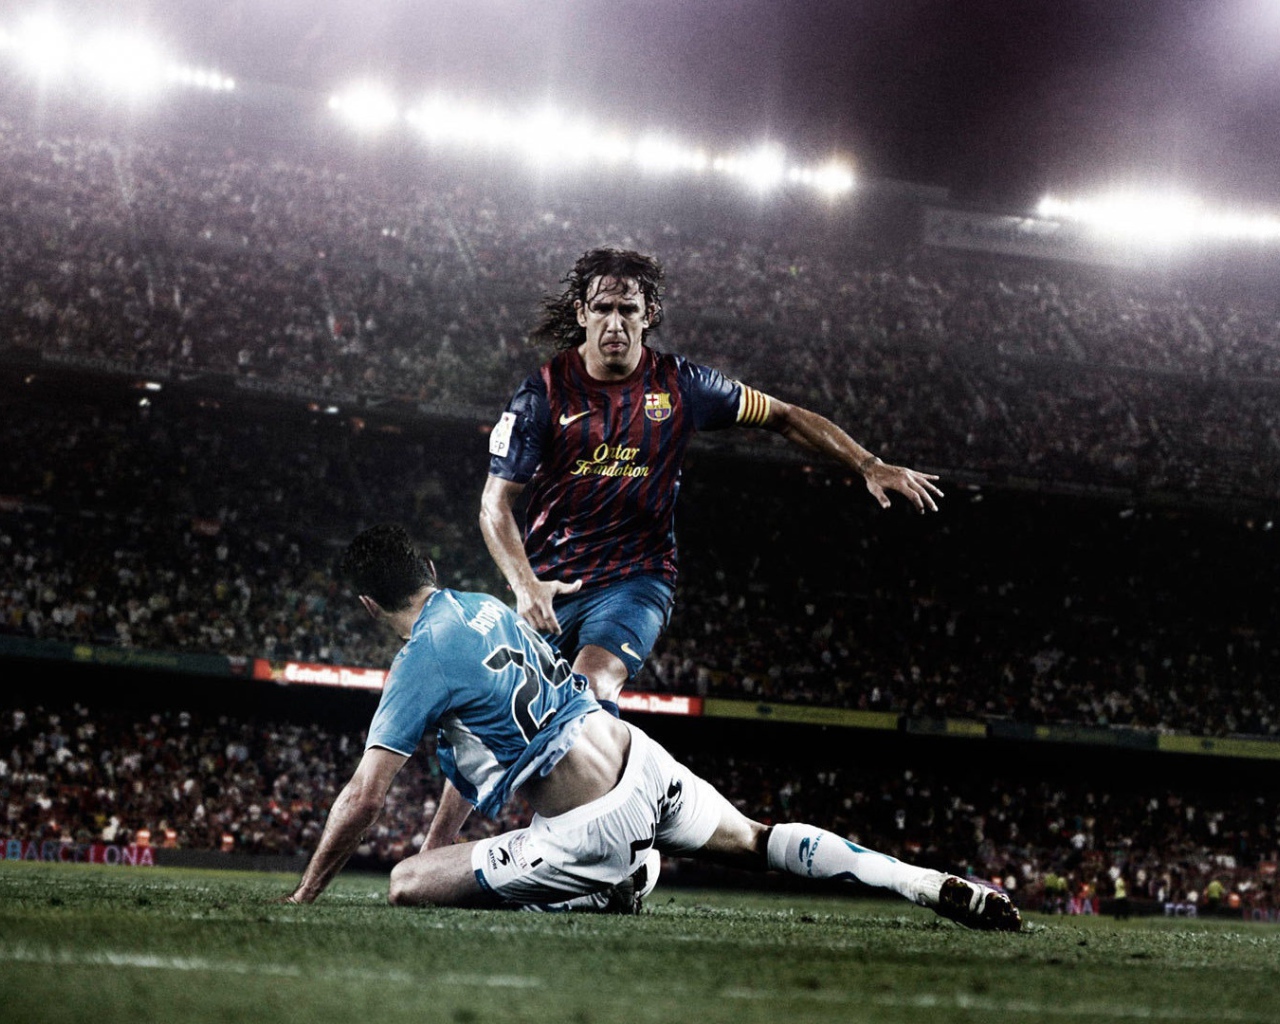 The football player of Barcelona Carles Puyol on the field